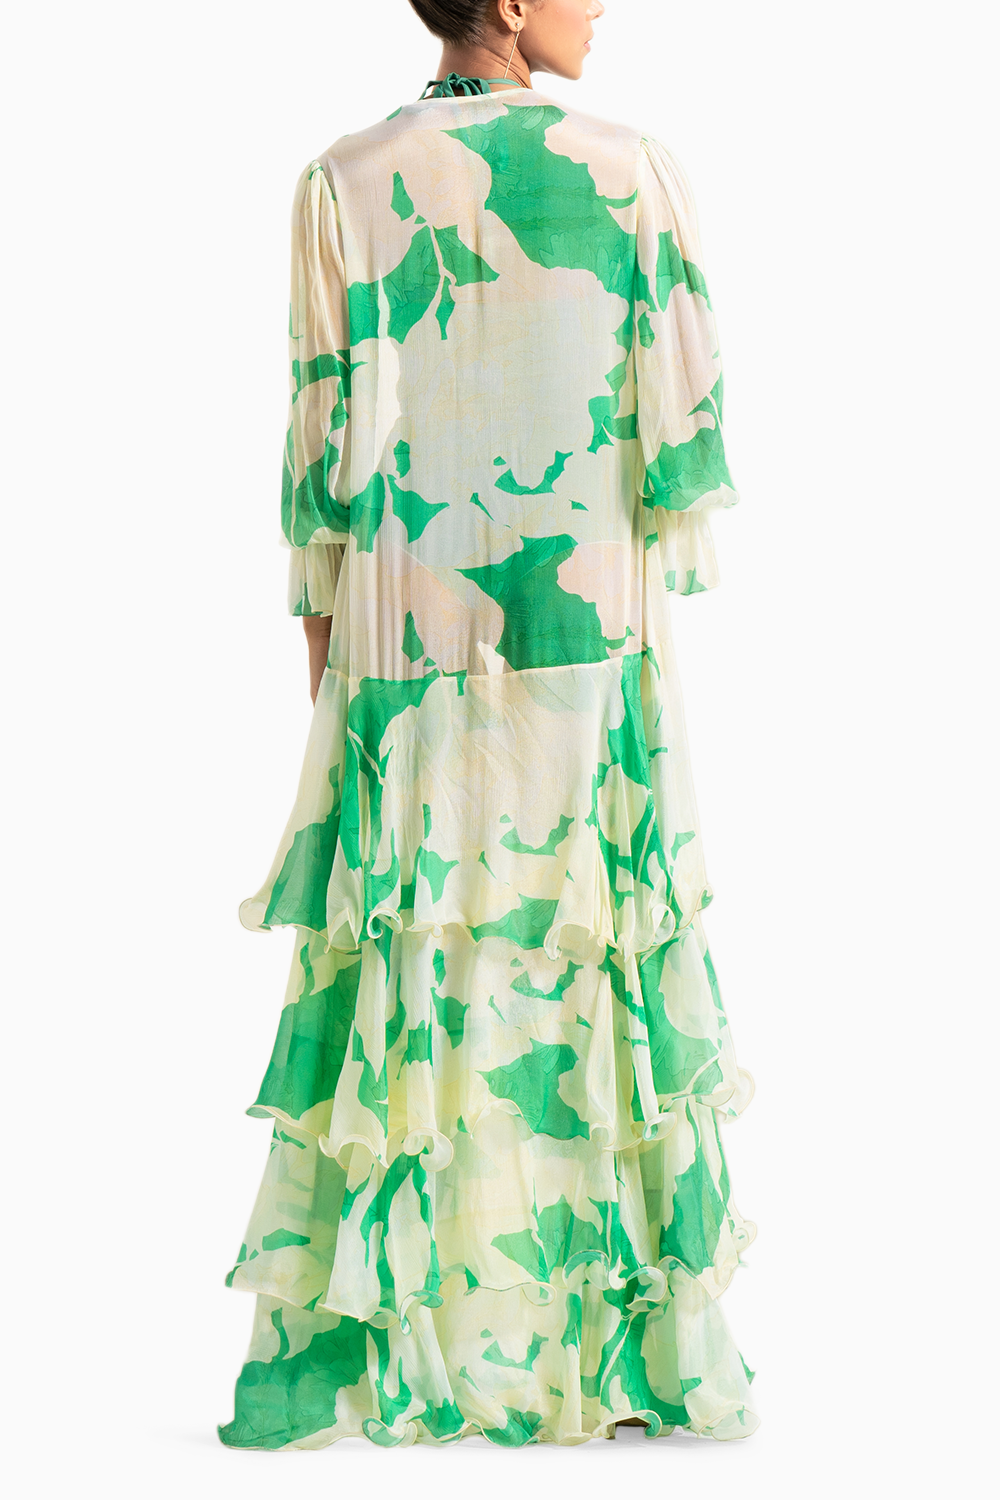 Green Bee Body Suit with Chiffon Cape